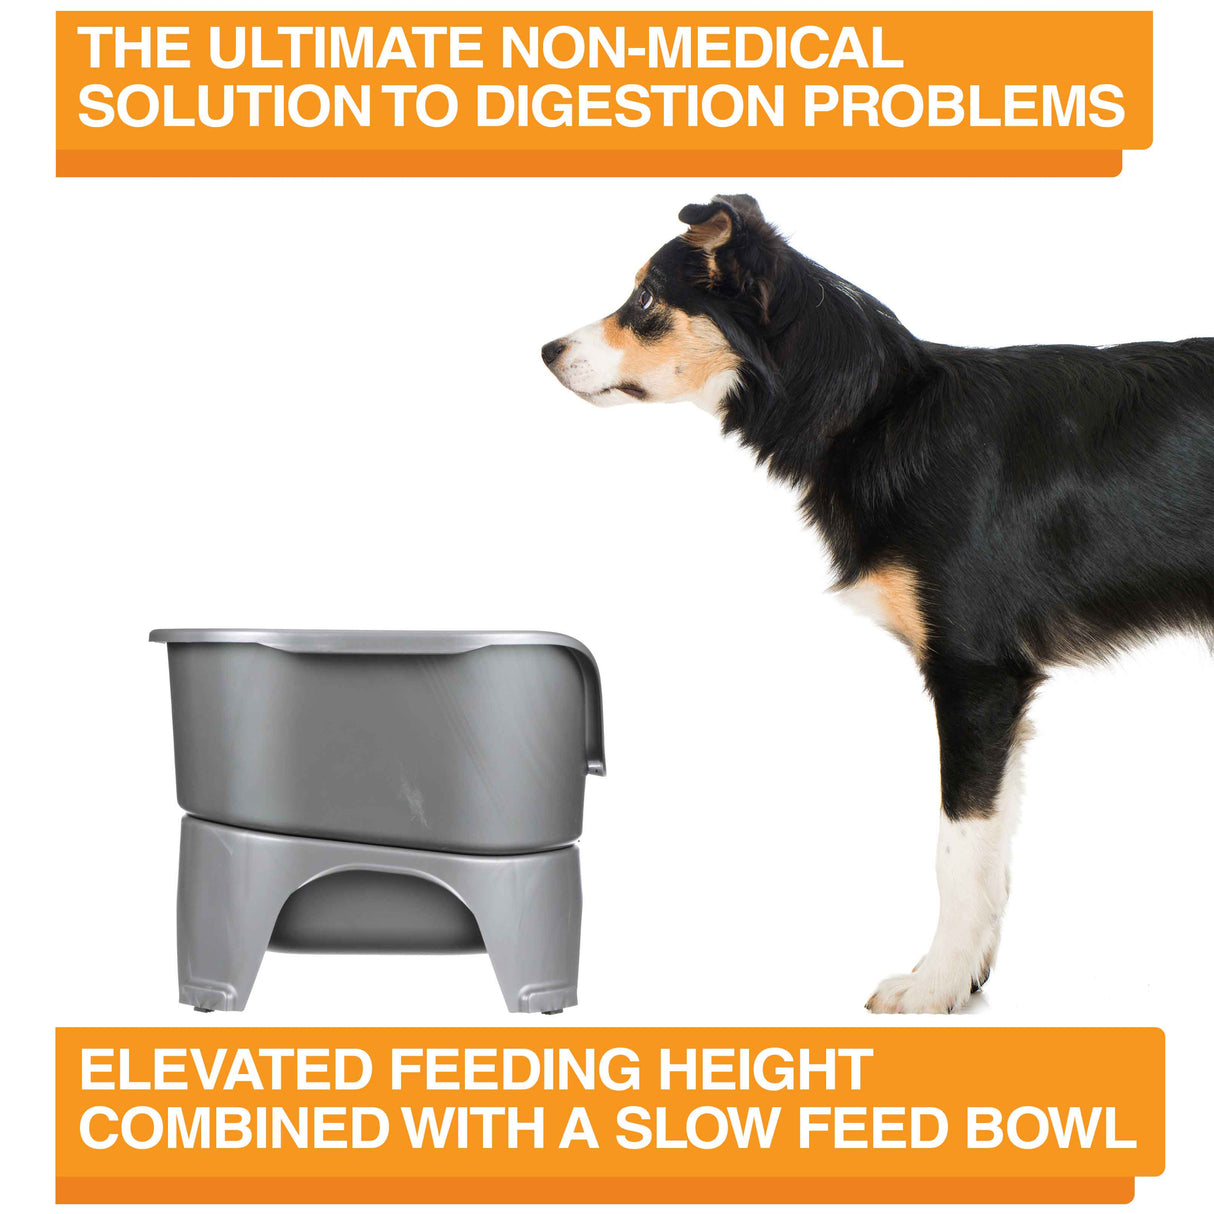 The ultimate non-medical solution to digestion problems is elevated feeding combined with a slow feed bowl